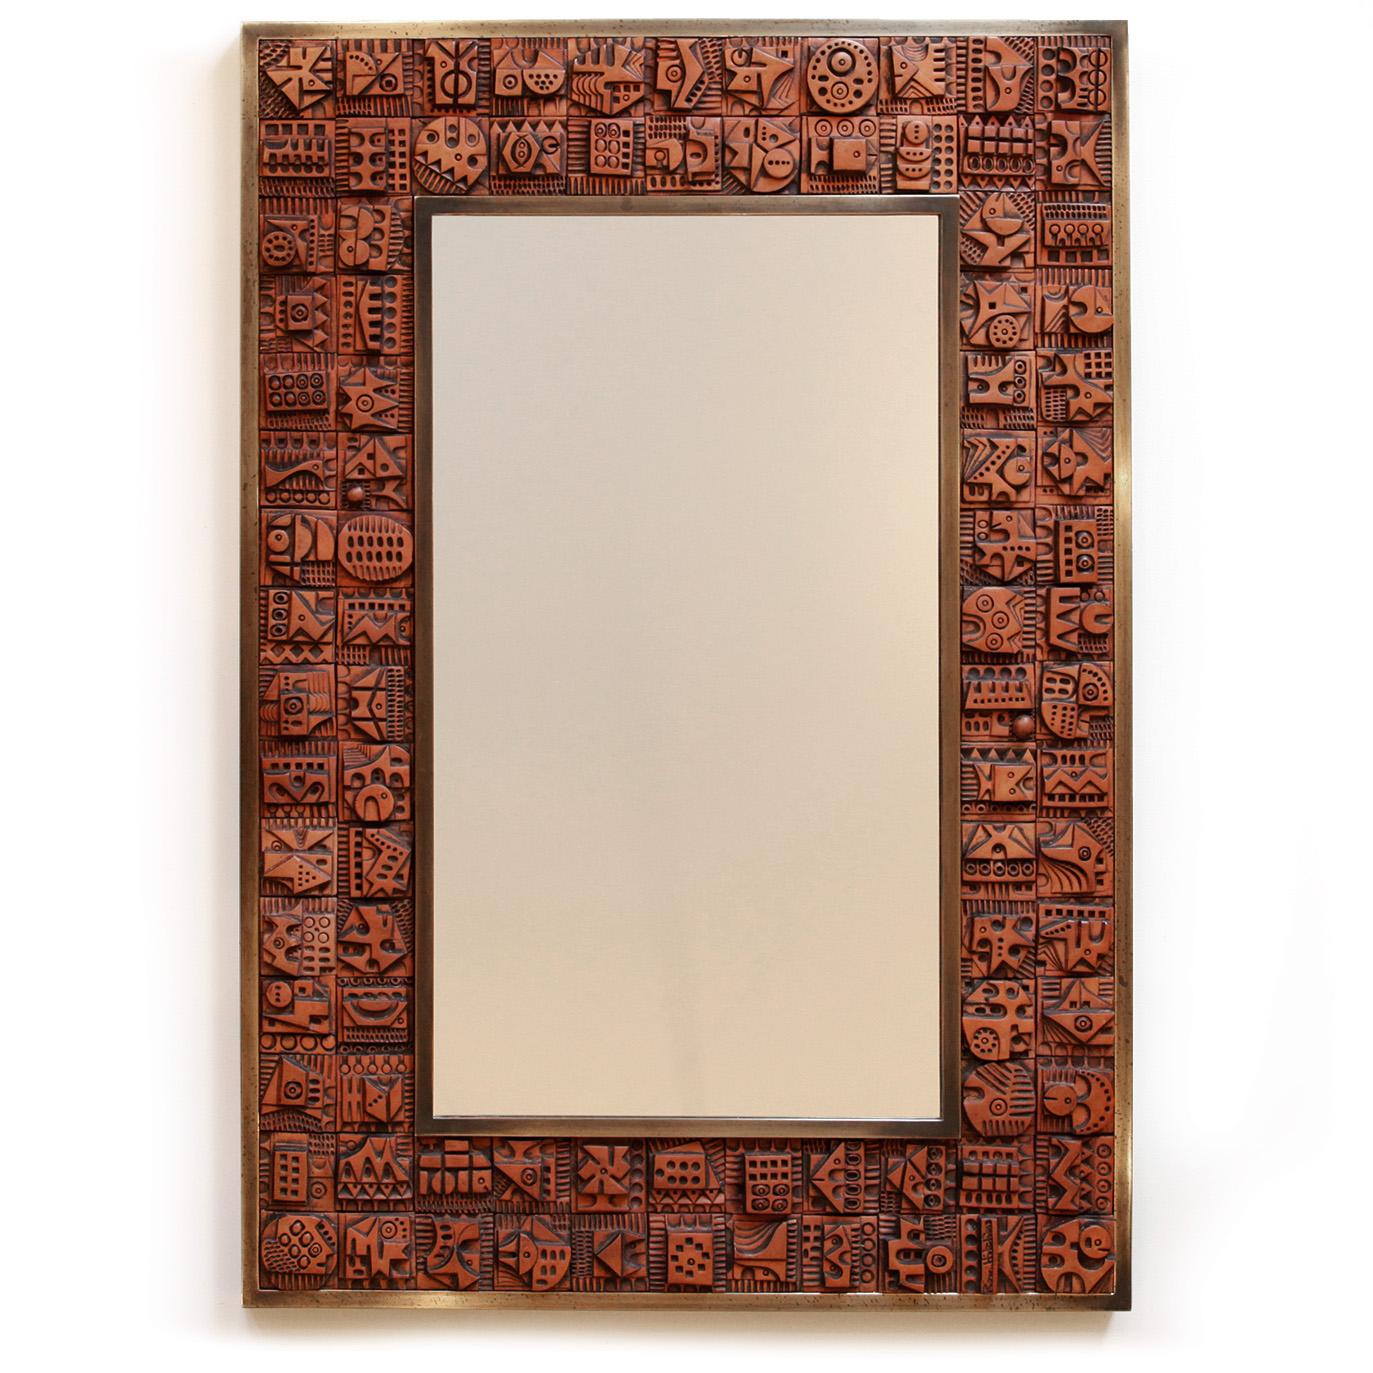 Stunning original mirror made by the artist, with 92 uniquely handmade terracotta tiles. Signed by the artist in one of the tiles. This large, striking mirror has a great Brutalist and Modernist feel. Another slightly larger mirror of the same style